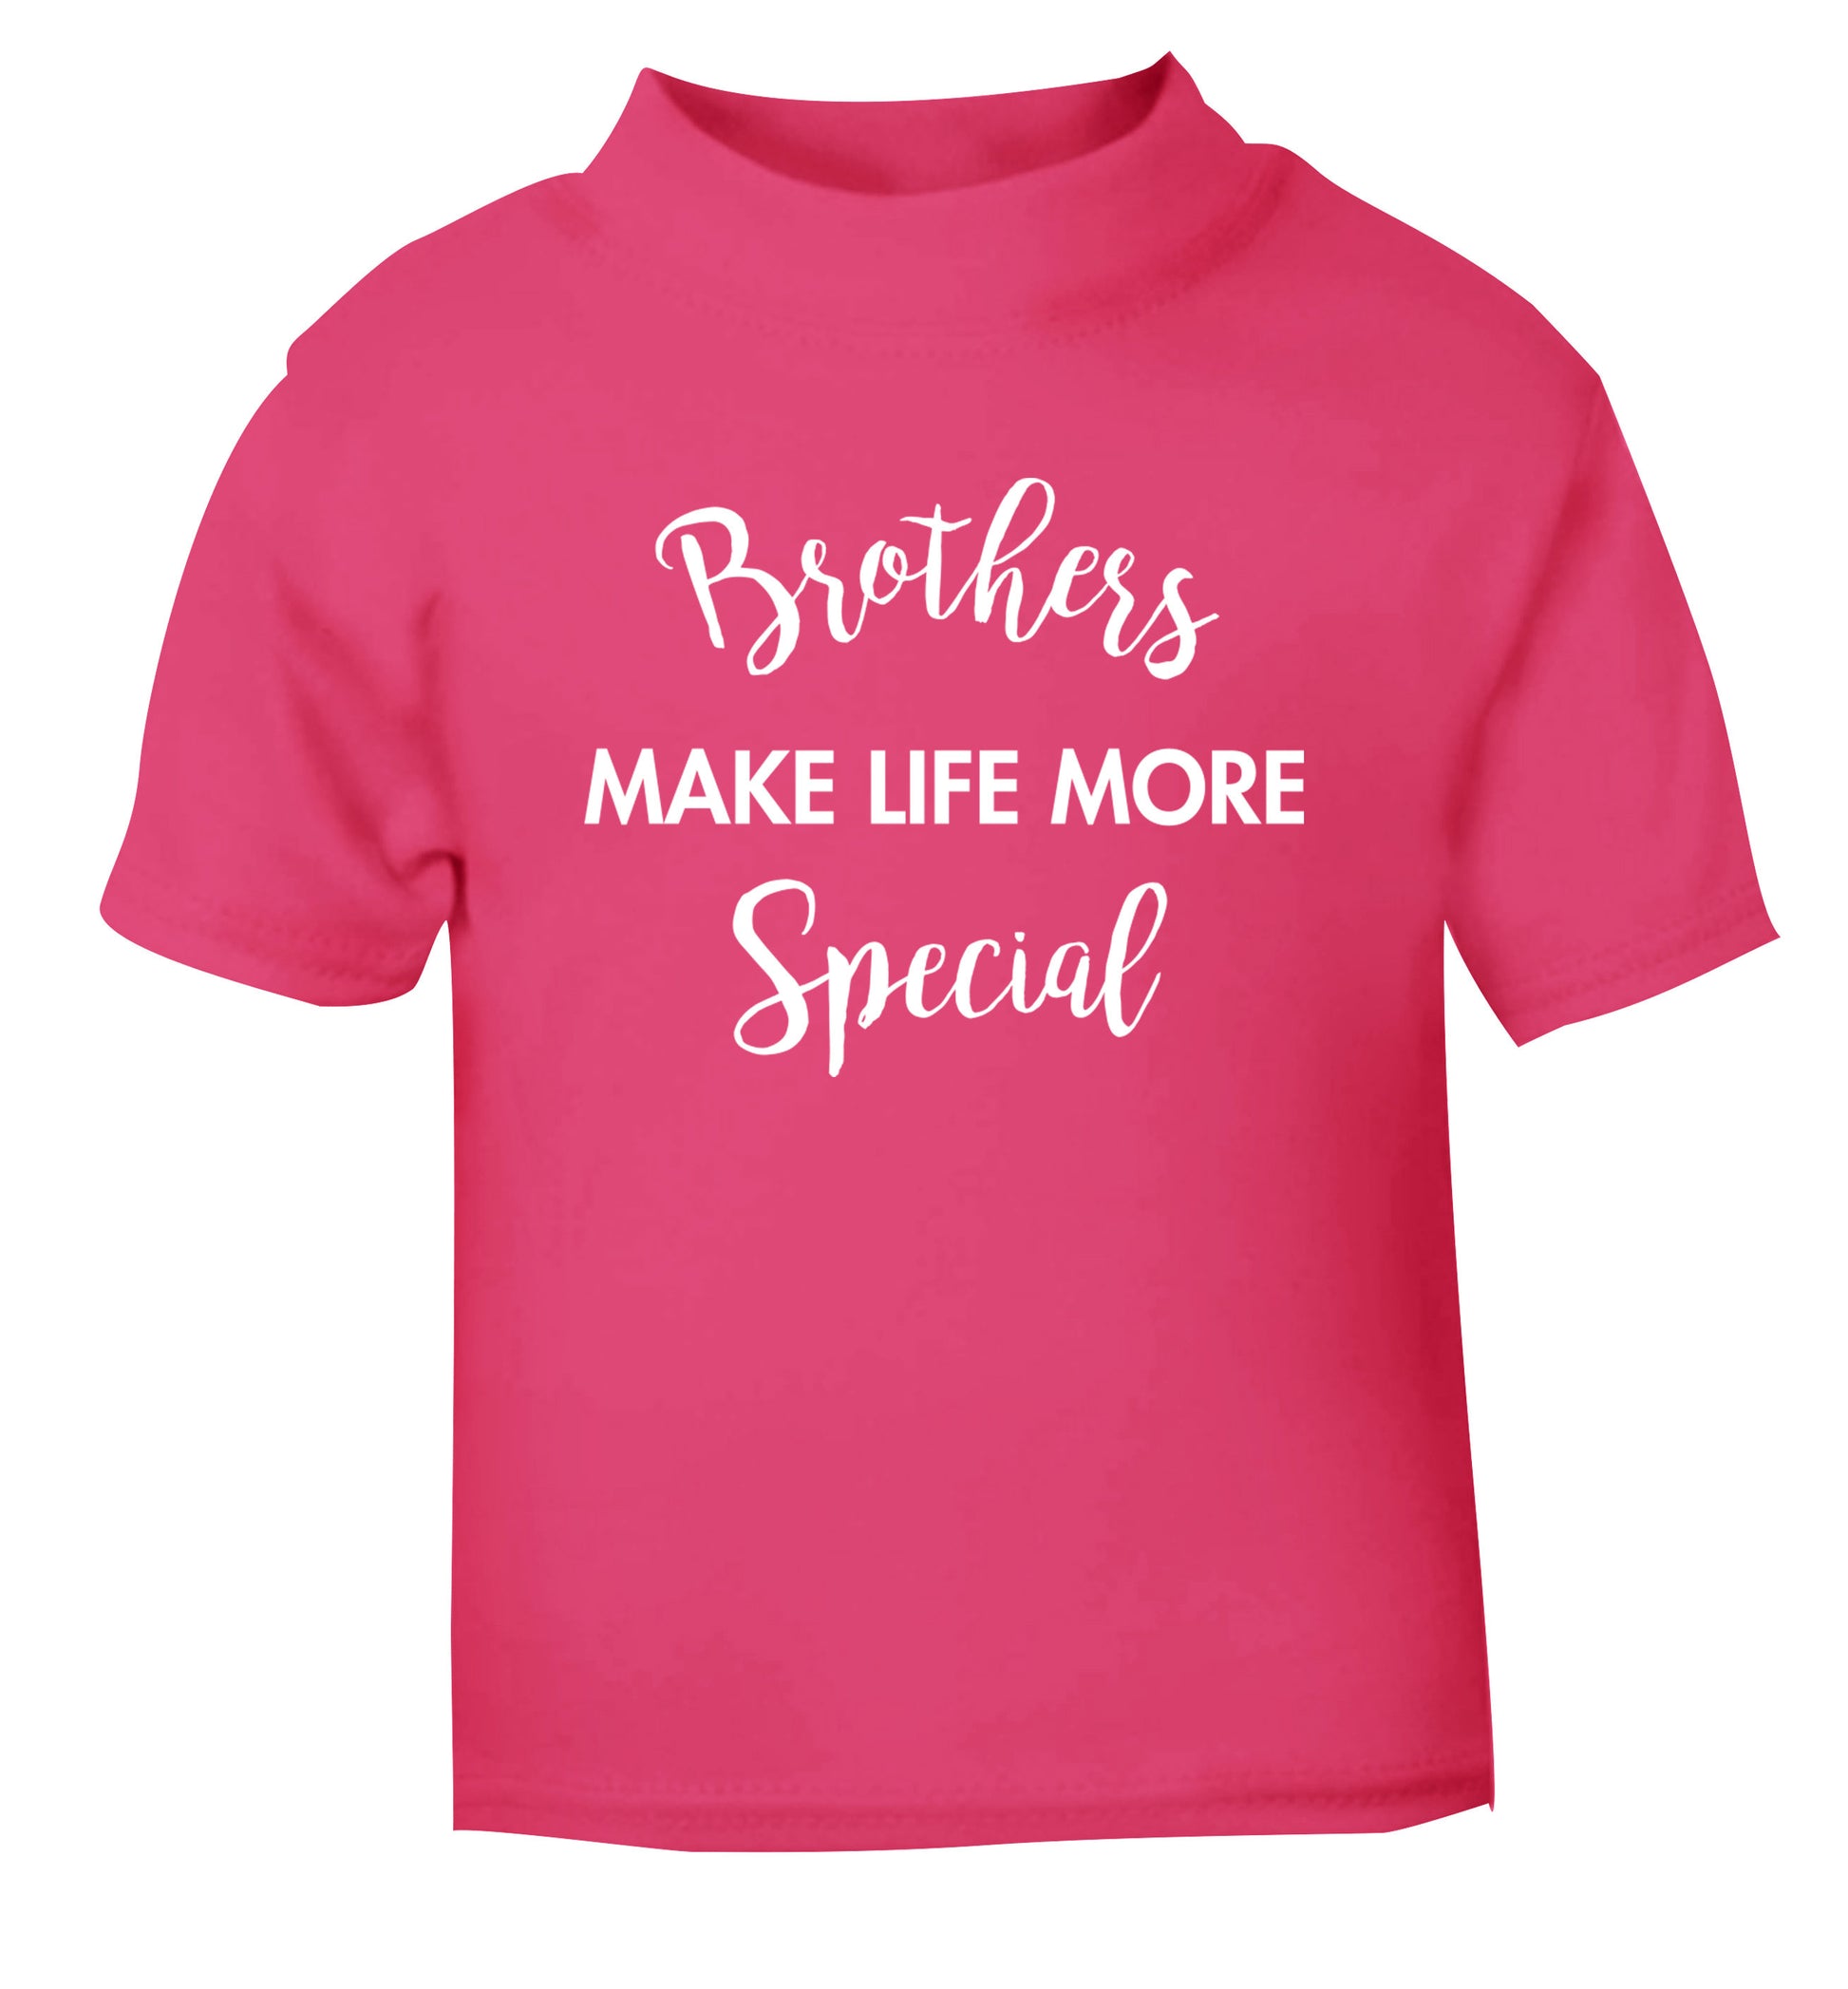 Brothers make life more special pink Baby Toddler Tshirt 2 Years